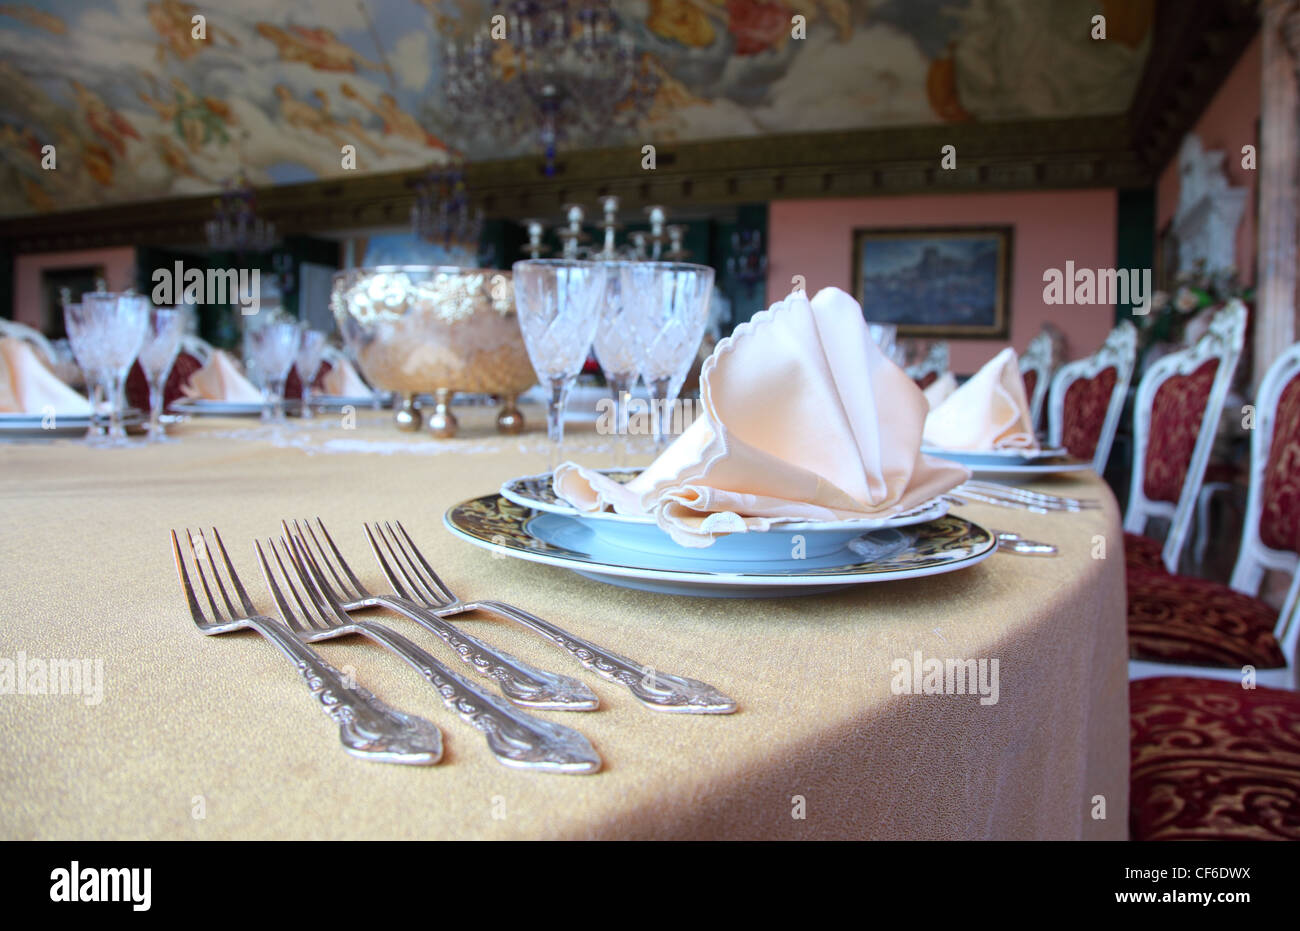 Four forks and two plates with placemat at the brink of dinner table in restaurant Stock Photo